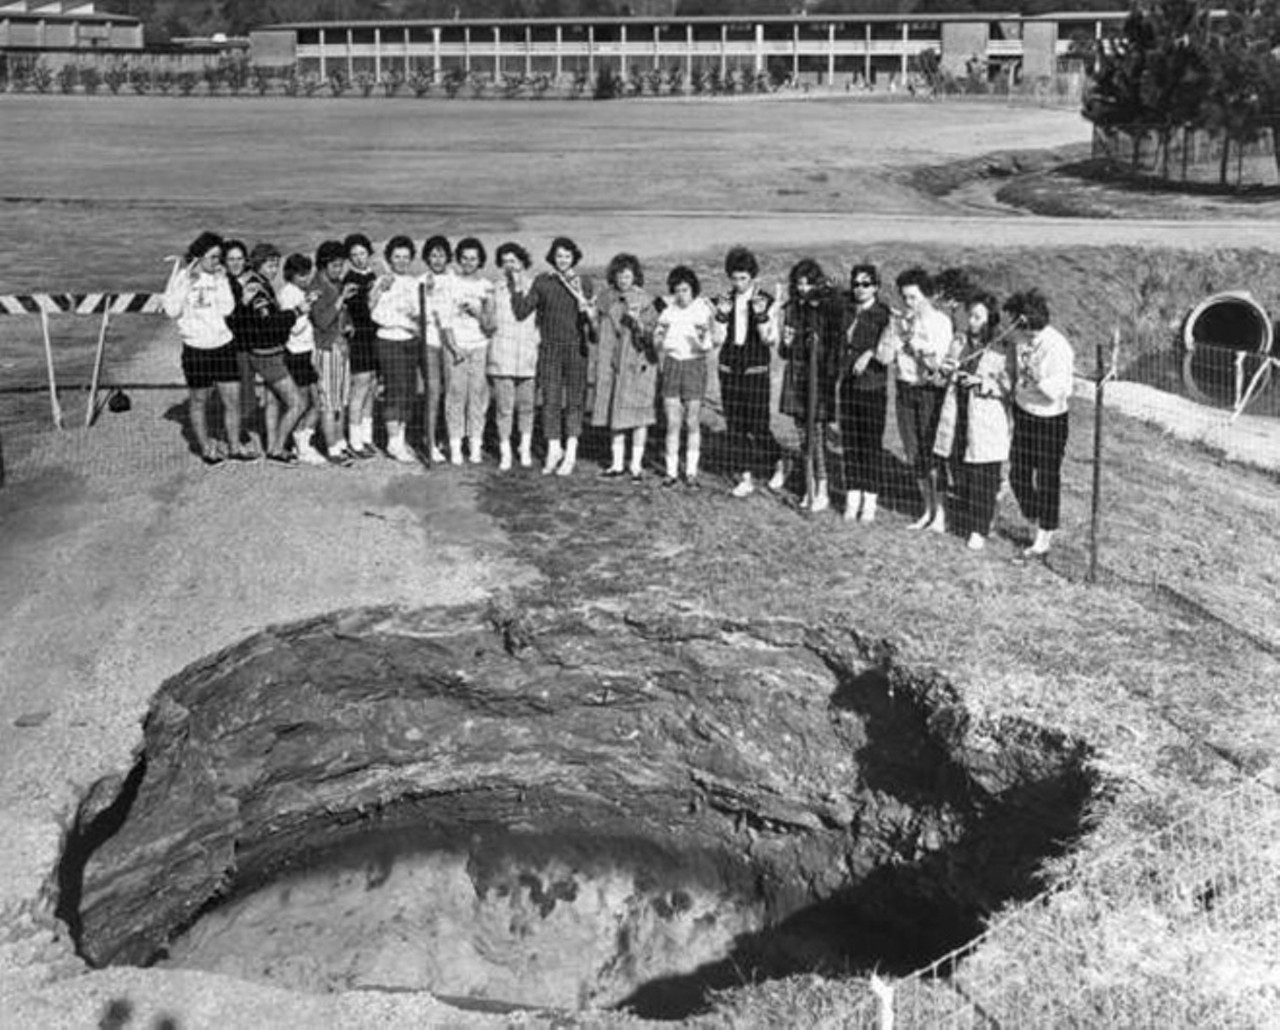 Sinkhole spotted at Florida State University in 1962
January 18, 1962
Female students from Florida High School took a break from their soccer game to look at this limestone sinkhole forming on FSU&#146;s campus. A state geologist at the time claimed that a sinkhole like this 26-footer &#147;might not be seen again in a half century.&#148;  That geologist was wrong. 
Photo via State Archives of Florida